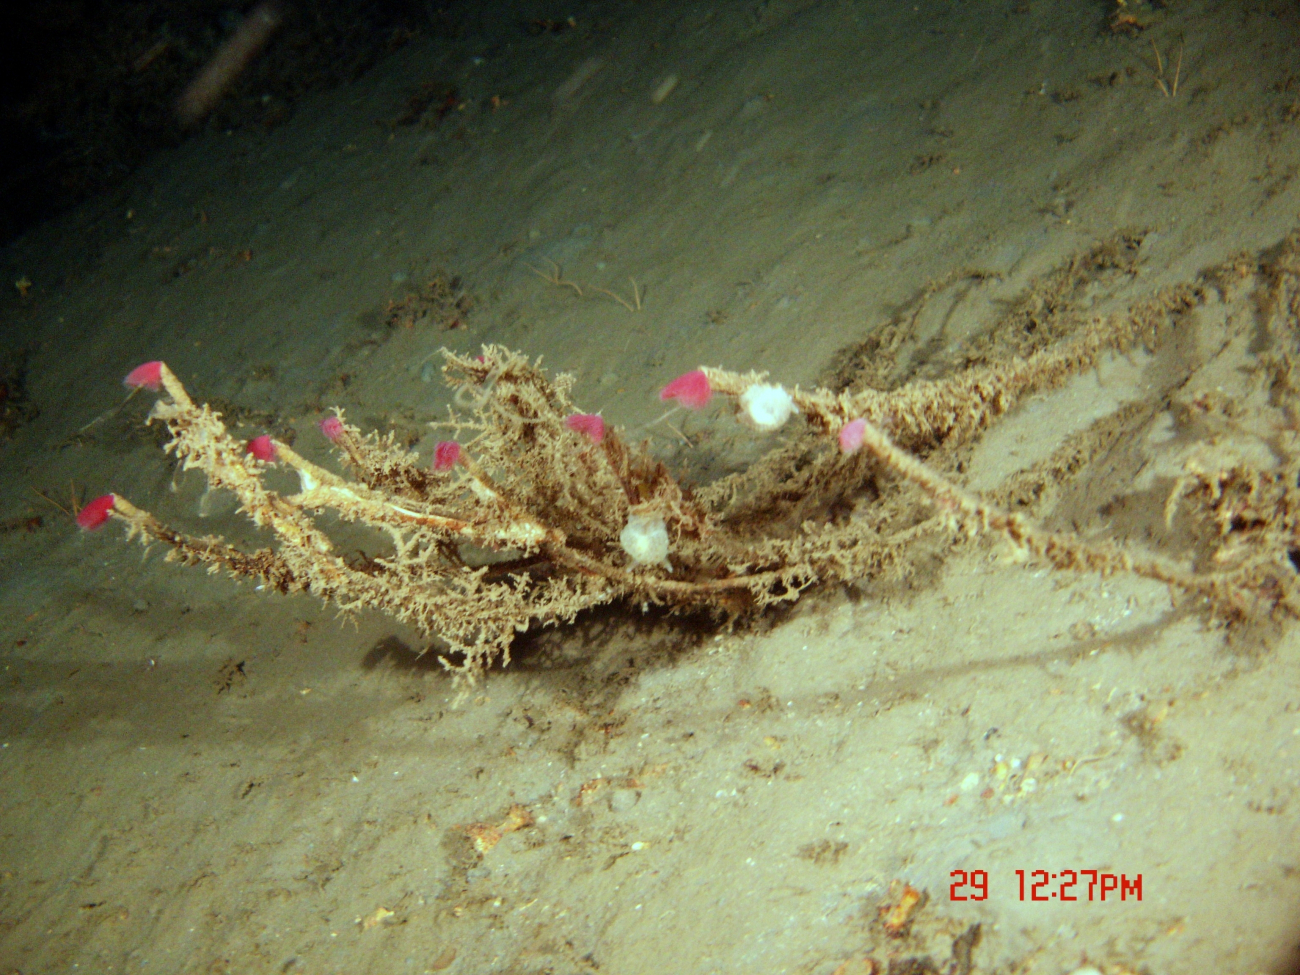 Tube worms with red tentacles extended